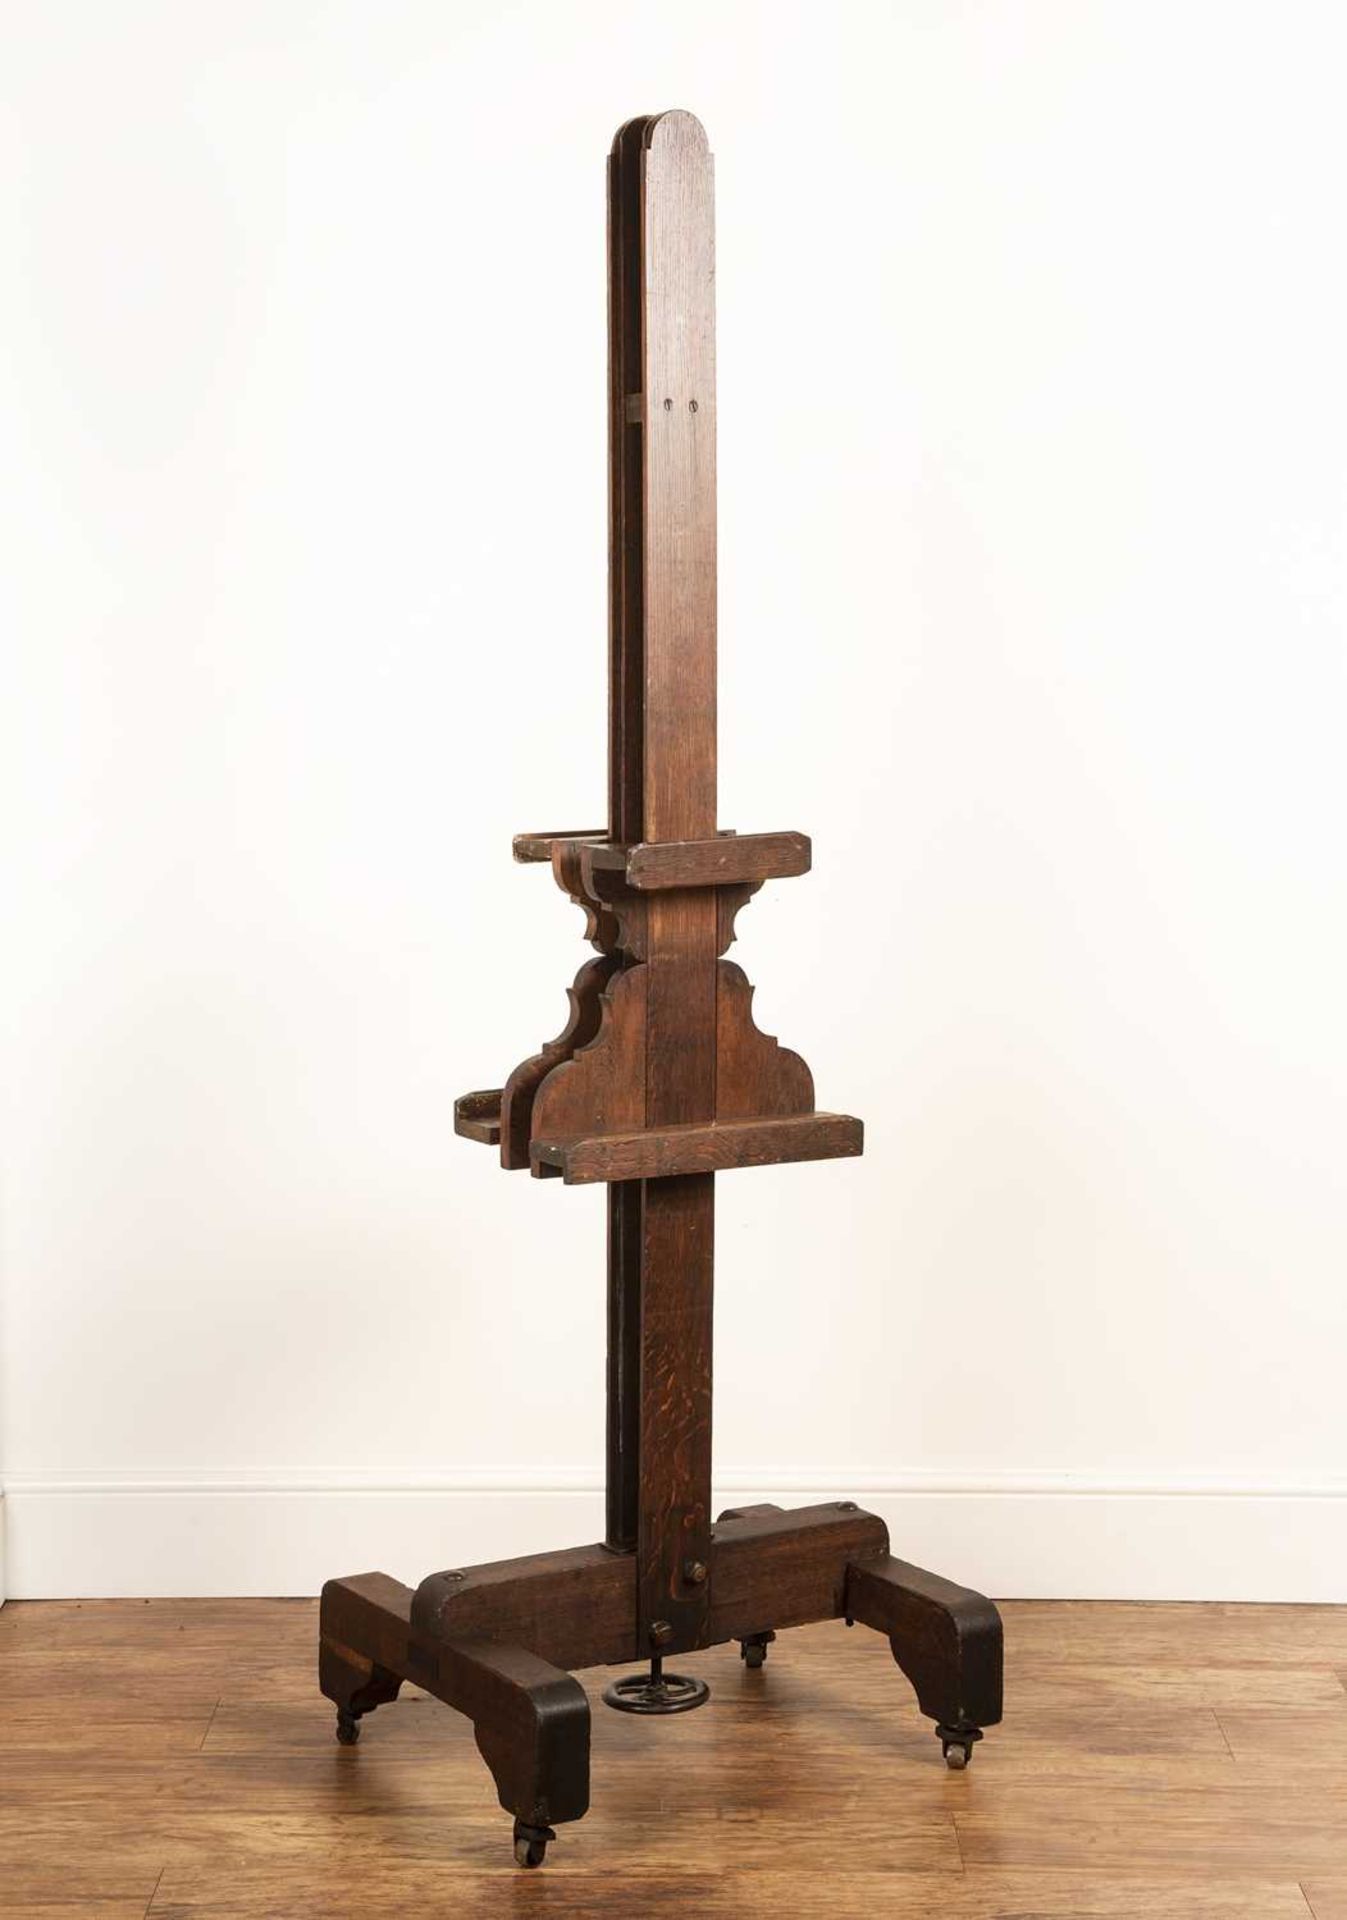 Oak artist's easel 19th Century, probably French, double-sided with adjustable height lever, 191cm